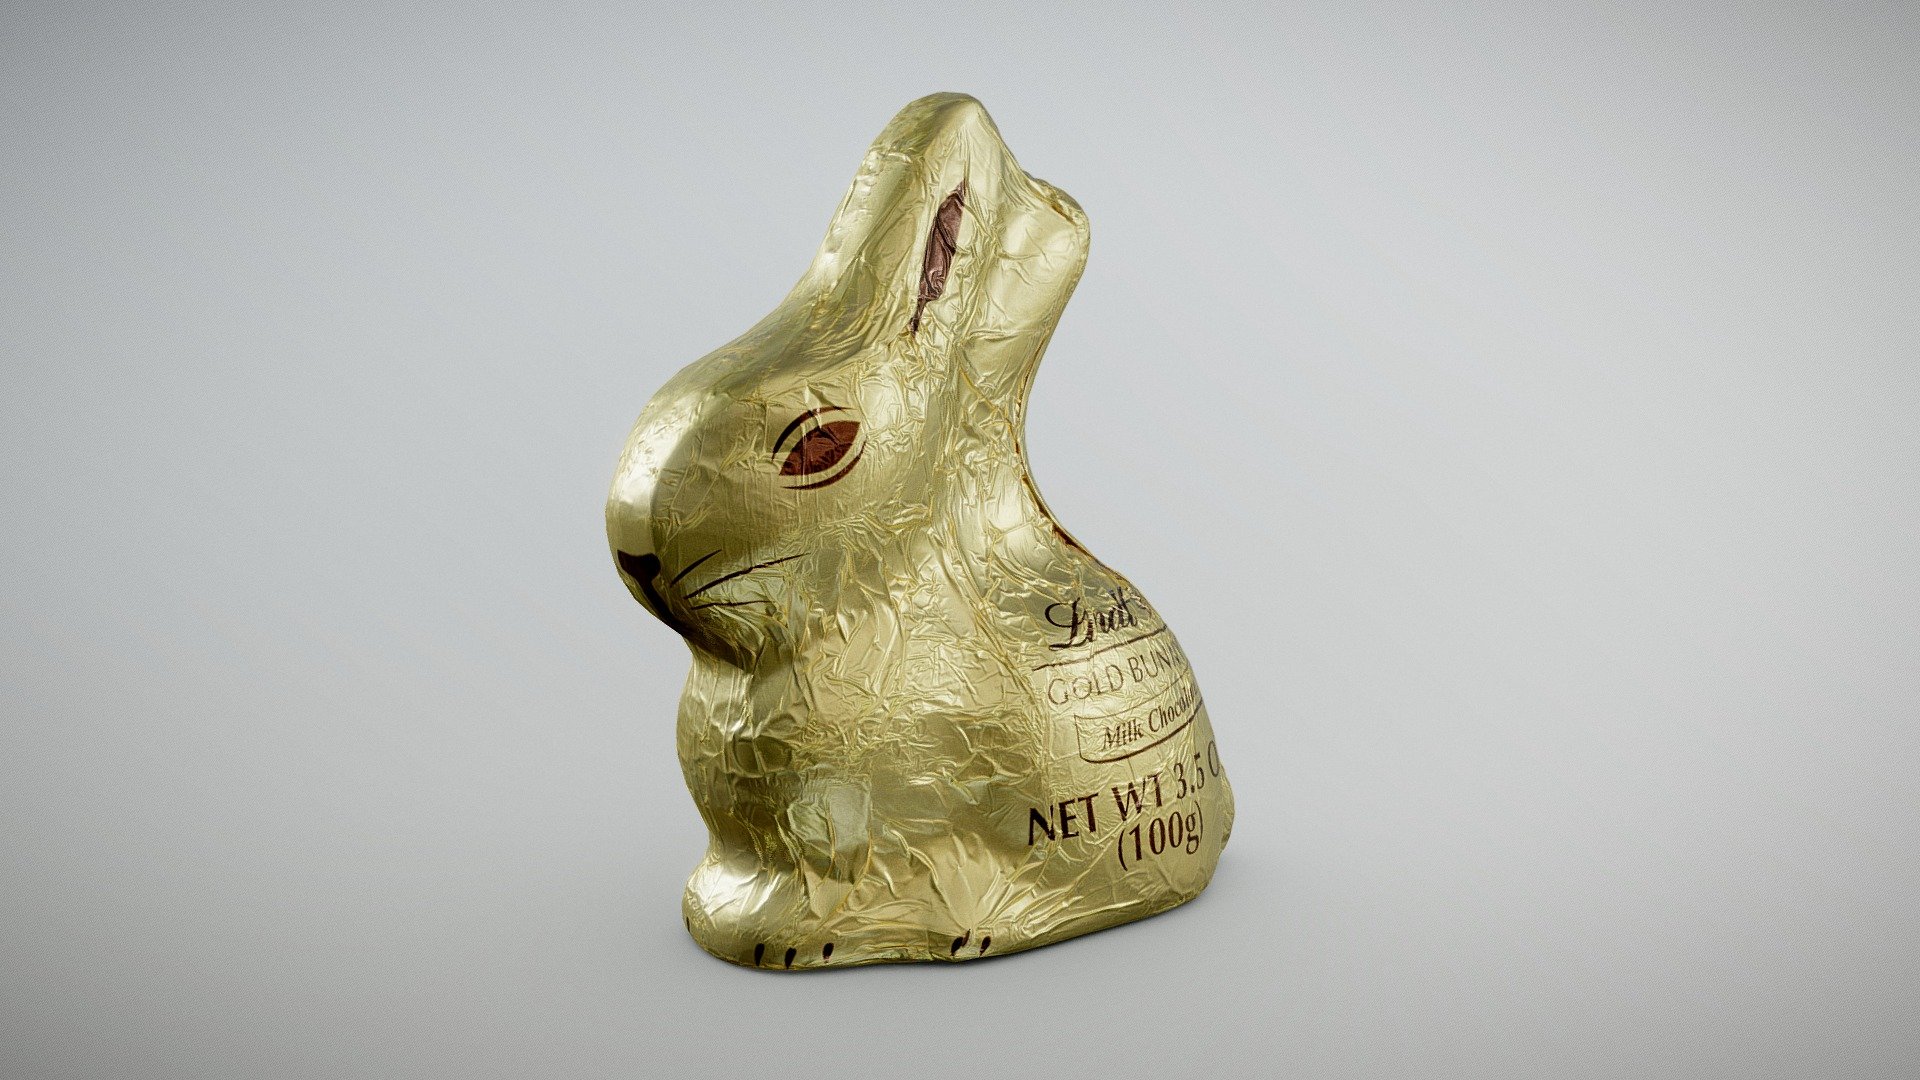 ** Gold Bunny (Wrapped) **

Lindt GOLD BUNNY Milk Chocolate from Germany.

9.9 x 4.9 x 11.2 cm (44 micrometers per texel @ 4k)

Scanned using advanced technology developed by inciprocal Inc. that enables highly photo-realistic reproduction of real-world products in virtual environments. Our hardware and software technology combines advanced photometry, structured light, photogrammtery and light fields to capture and generate accurate material representations from tens of thousands of images targeting real-time and offline path-traced PBR compatible renderers.

Zip file includes low-poly OBJ mesh (in meters) with a set of 4k PBR textures compressed with lossless JPEG (no chroma sub-sampling) 3d model